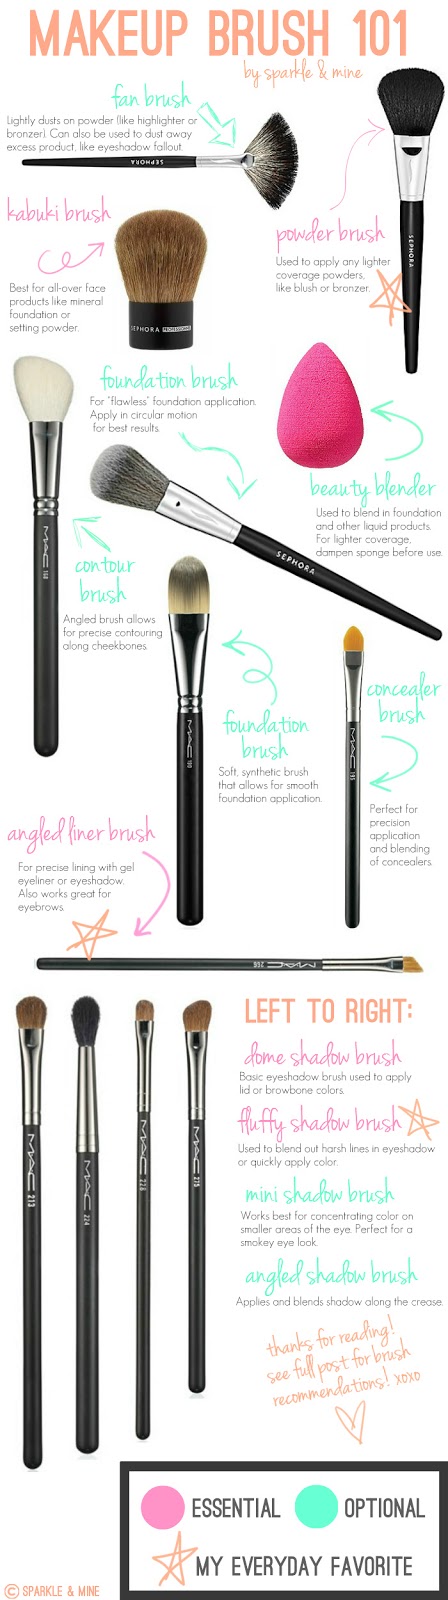 What are all of these brushes for